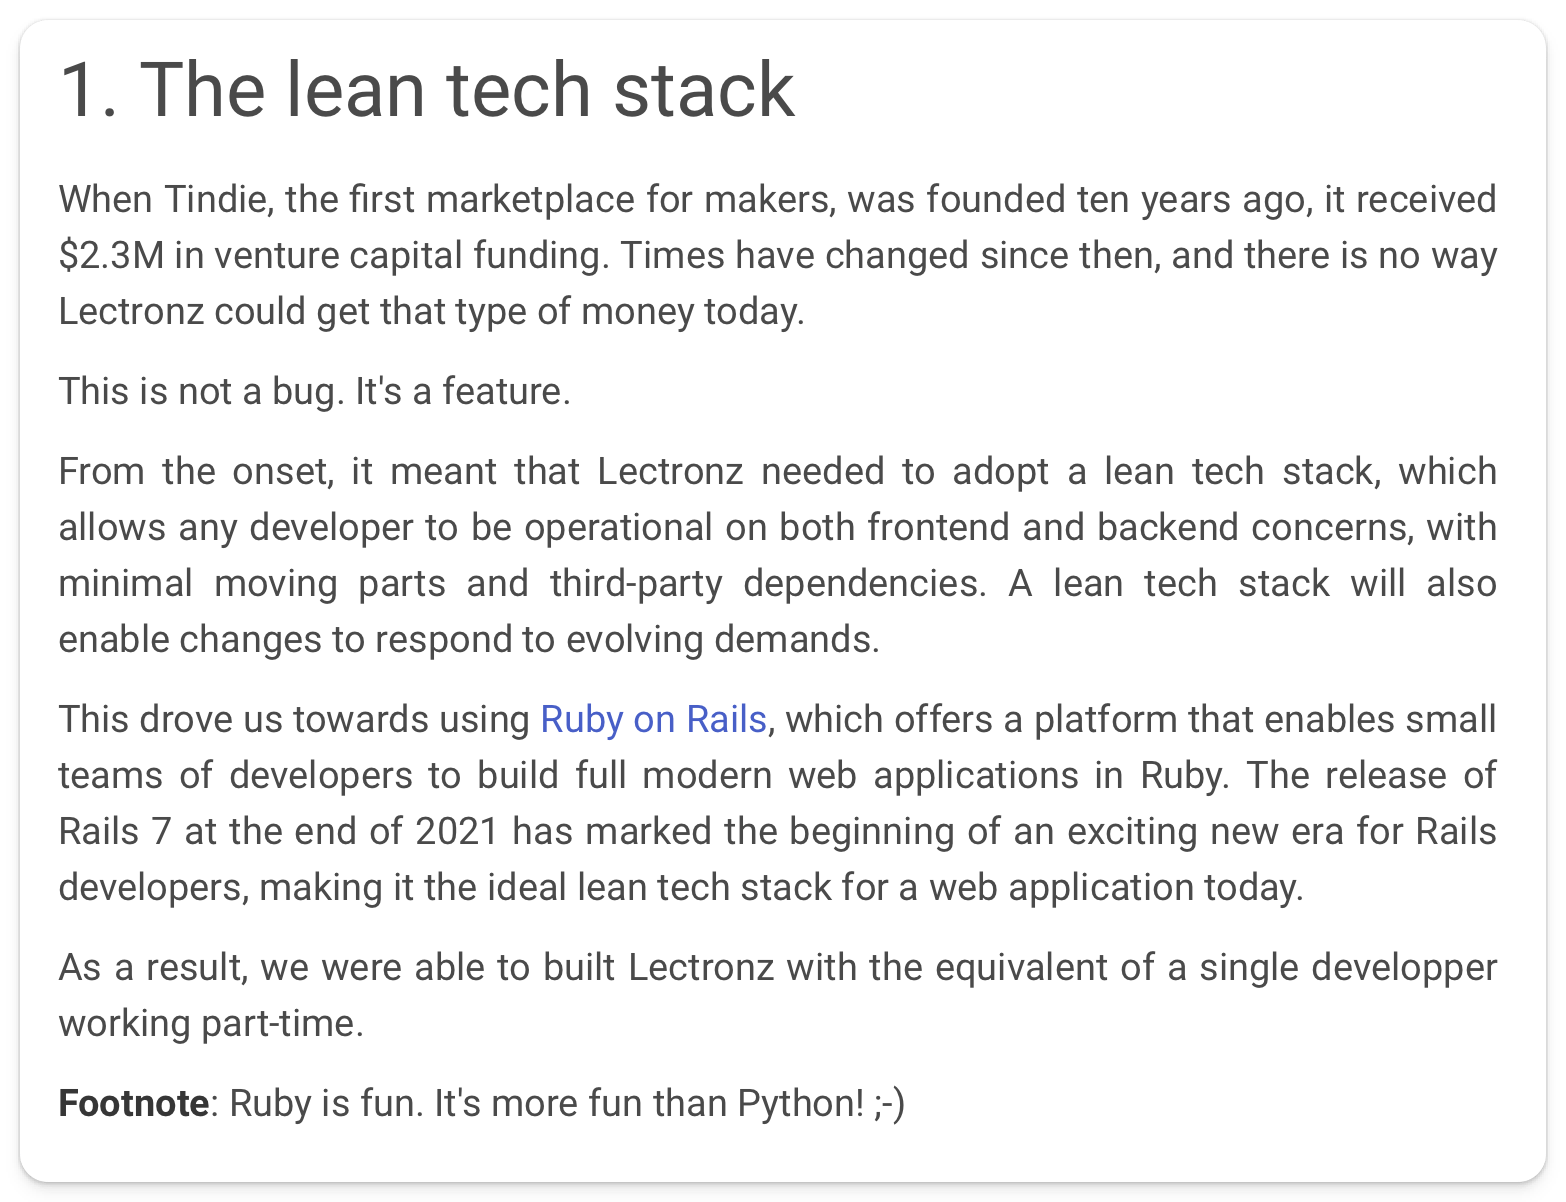 "From the onset, it meant that Lectronz needed to adopt a lean tech stack, which allows any developer to be operational on both frontend and backend concerns, with minimal moving parts and third-party dependencies. A lean tech stack will also enable changes to respond to evolving demands. This drove us towards using Ruby on Rails, which offers a platform that enables small teams of developers to build full modern web applications in Ruby. The release of Rails 7 at the end of 2021 has marked the beginning of an exciting new era for Rails developers, making it the ideal lean tech stack for a web application today. As a result, we were able to built Lectronz with the equivalent of a single developper working part-time."